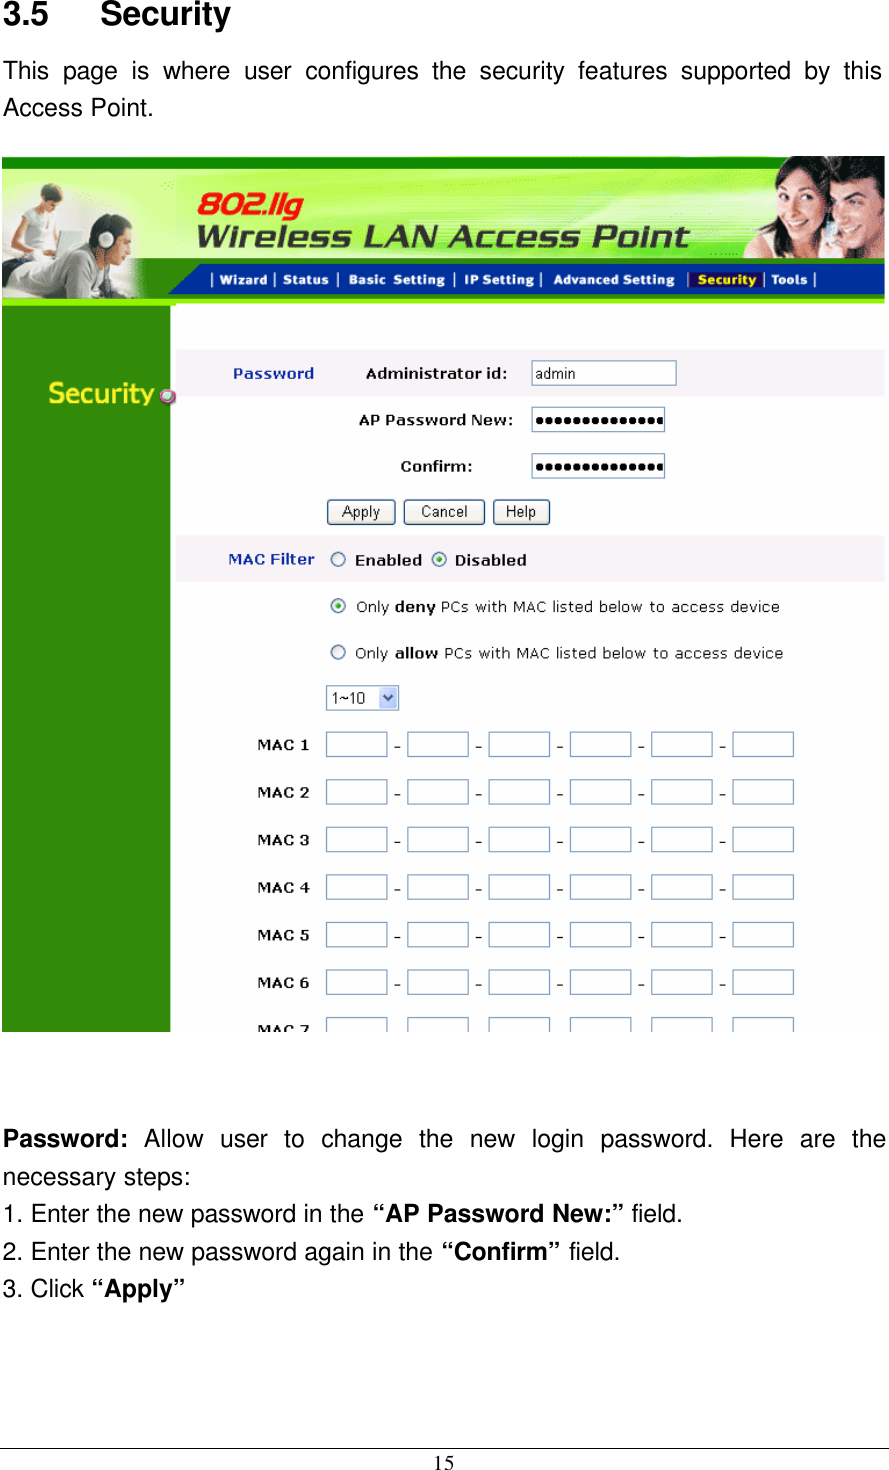  15 3.5    Security This page is where user configures the security features supported by this Access Point.   Password:  Allow  user to change the new login password. Here are the necessary steps: 1. Enter the new password in the “AP Password New:” field. 2. Enter the new password again in the “Confirm” field. 3. Click “Apply”   